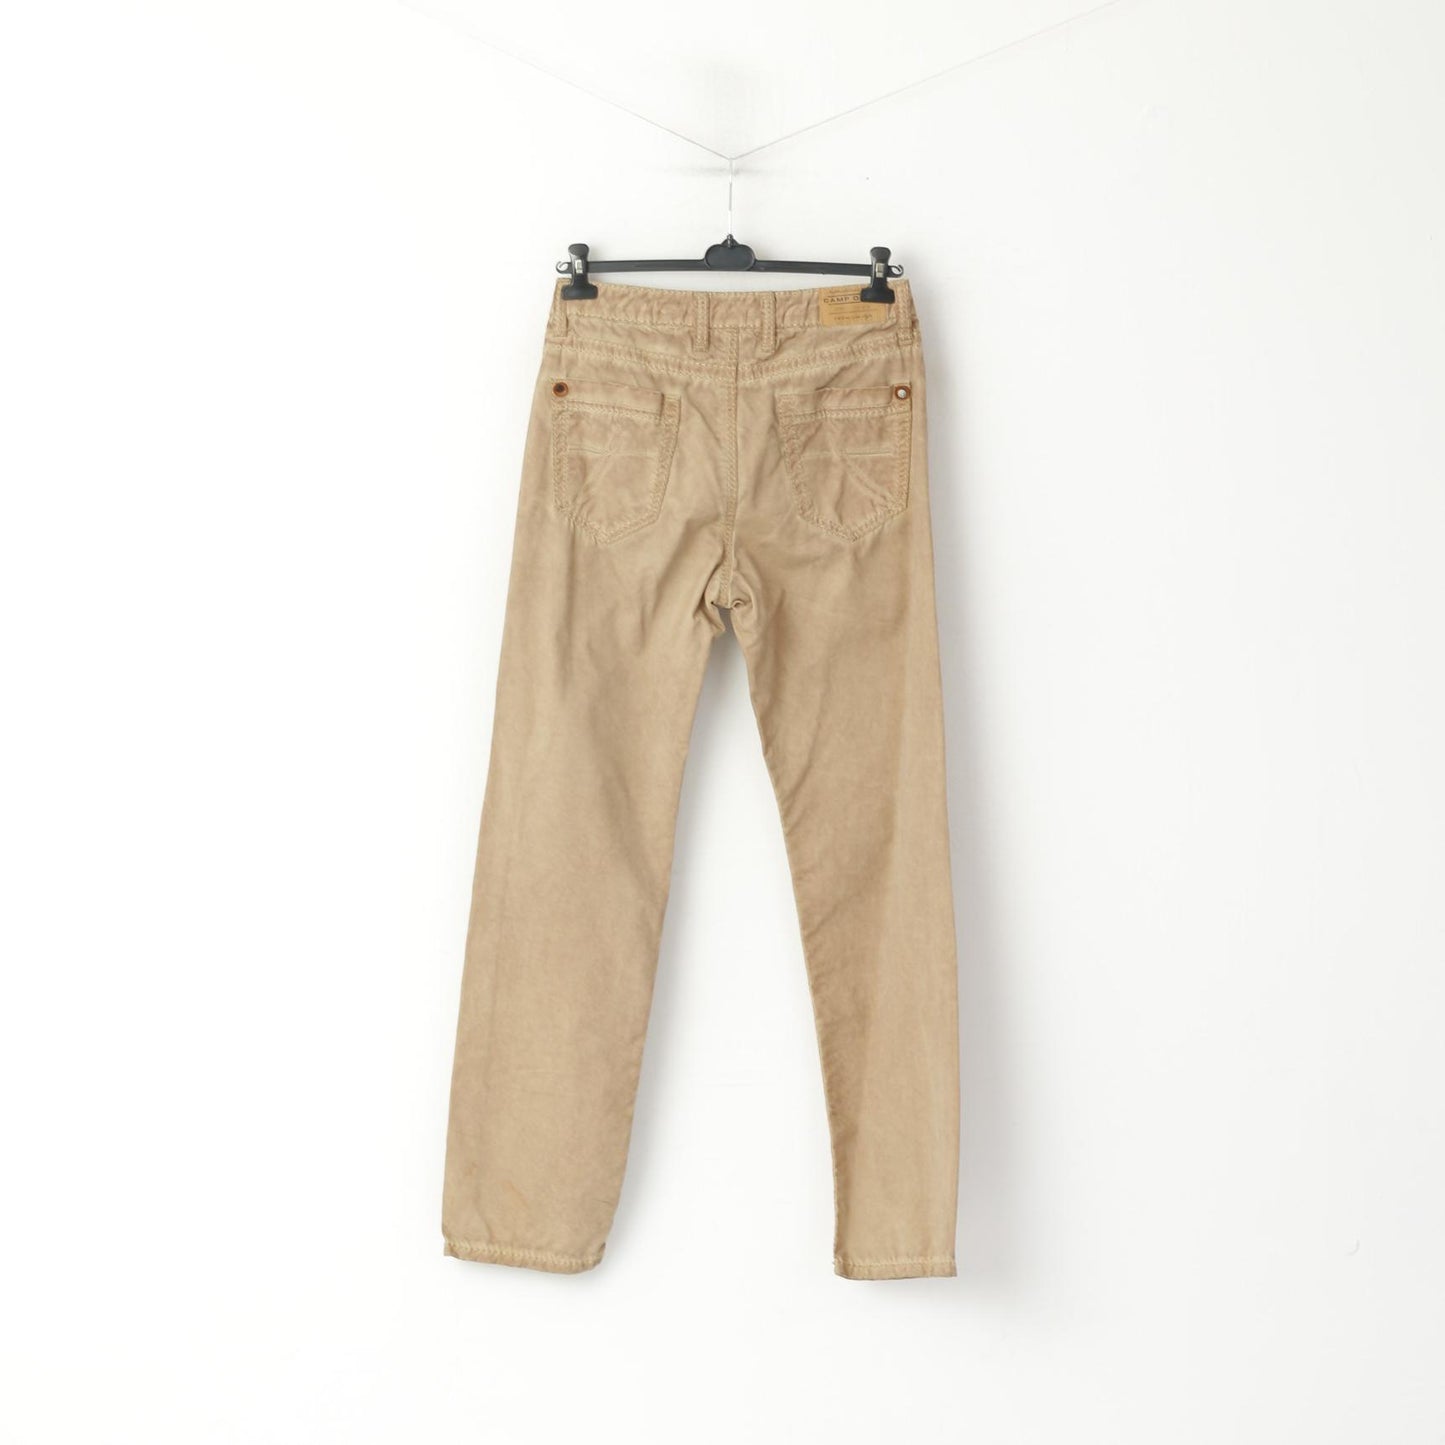 Camp David Men M 34 Trousers Brown Faded Cotton High Quality Casual Pants